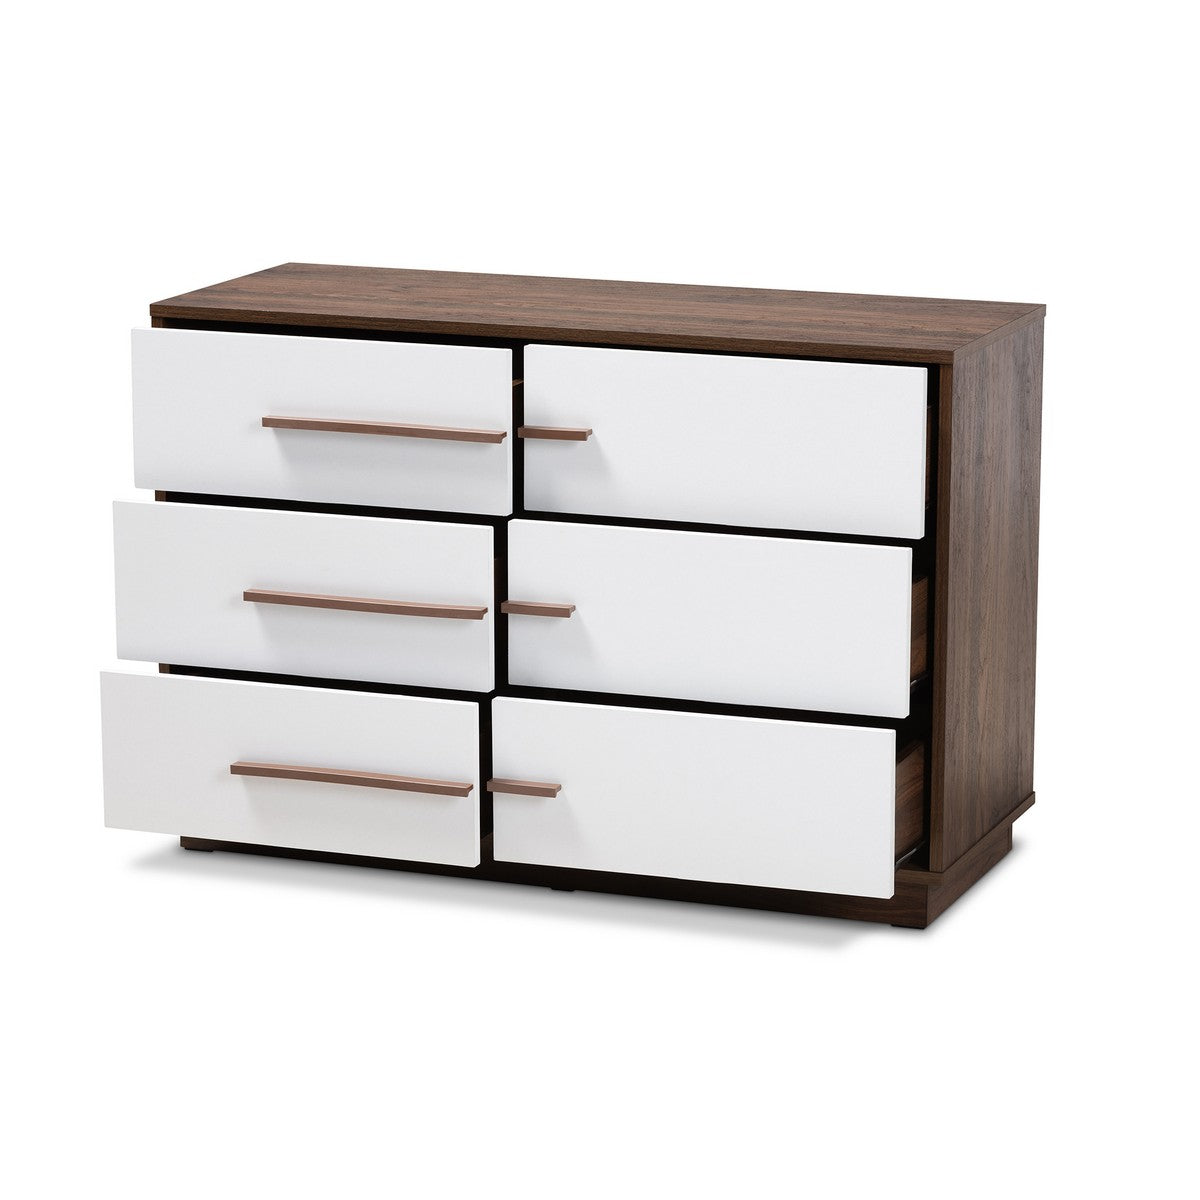 Baxton Studio Mette Mid-Century Modern Two-Tone White and Walnut Finished 6-Drawer Wood Dresser Baxton Studio-Dresser-Minimal And Modern - 1